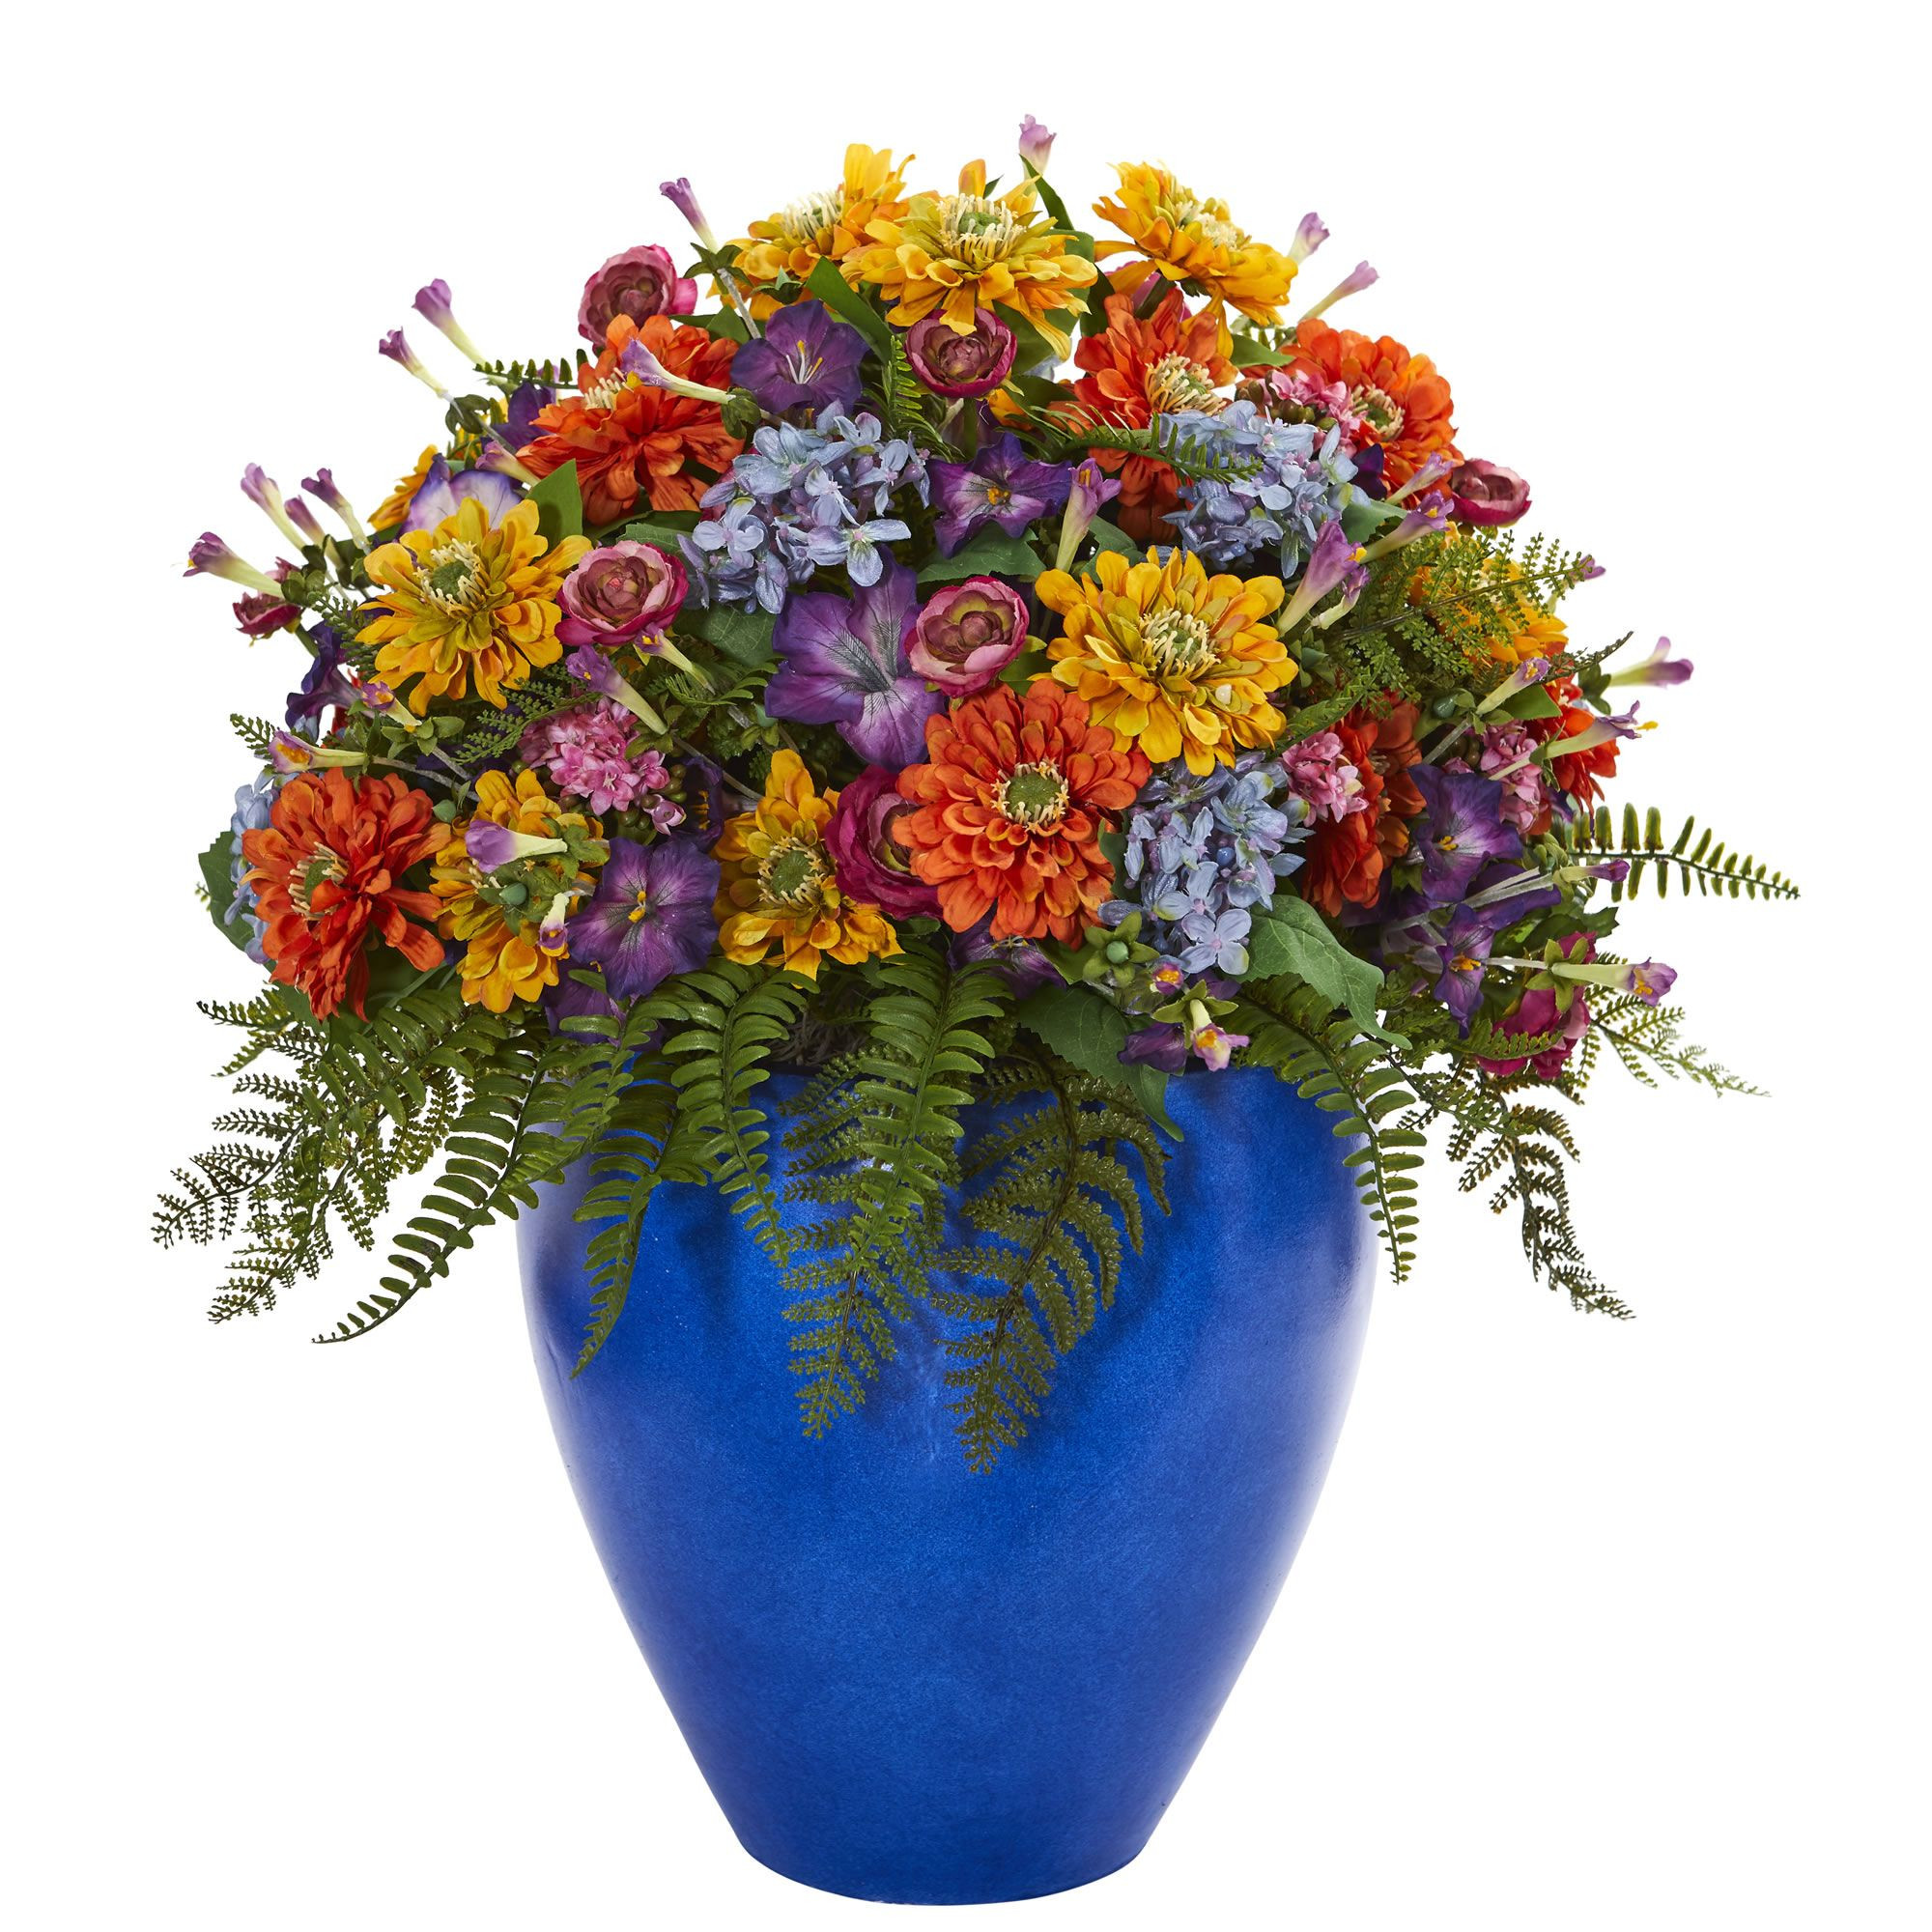 27 Fashionable Flower Vase and Artificial Flowers 2024 free download flower vase and artificial flowers of 24 h giant mixed floral artificial arrangement in blue vase blue with 24 h giant mixed floral artificial arrangement in blue vase faux trees n shrubs